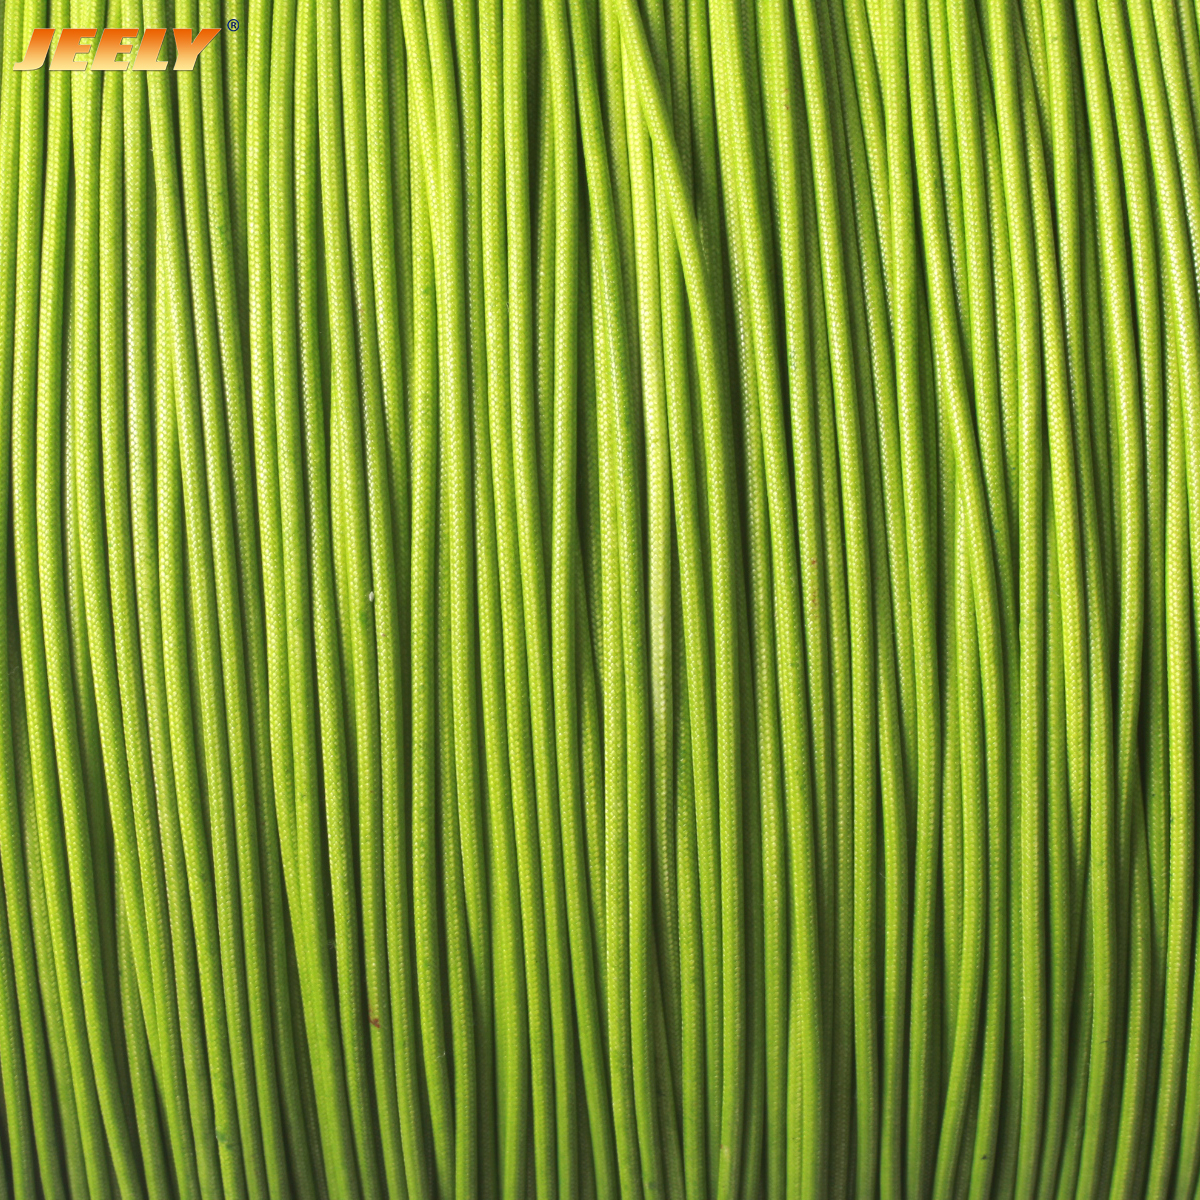 Green Nylon Uhmwpe Double Braid Rope For Mooring